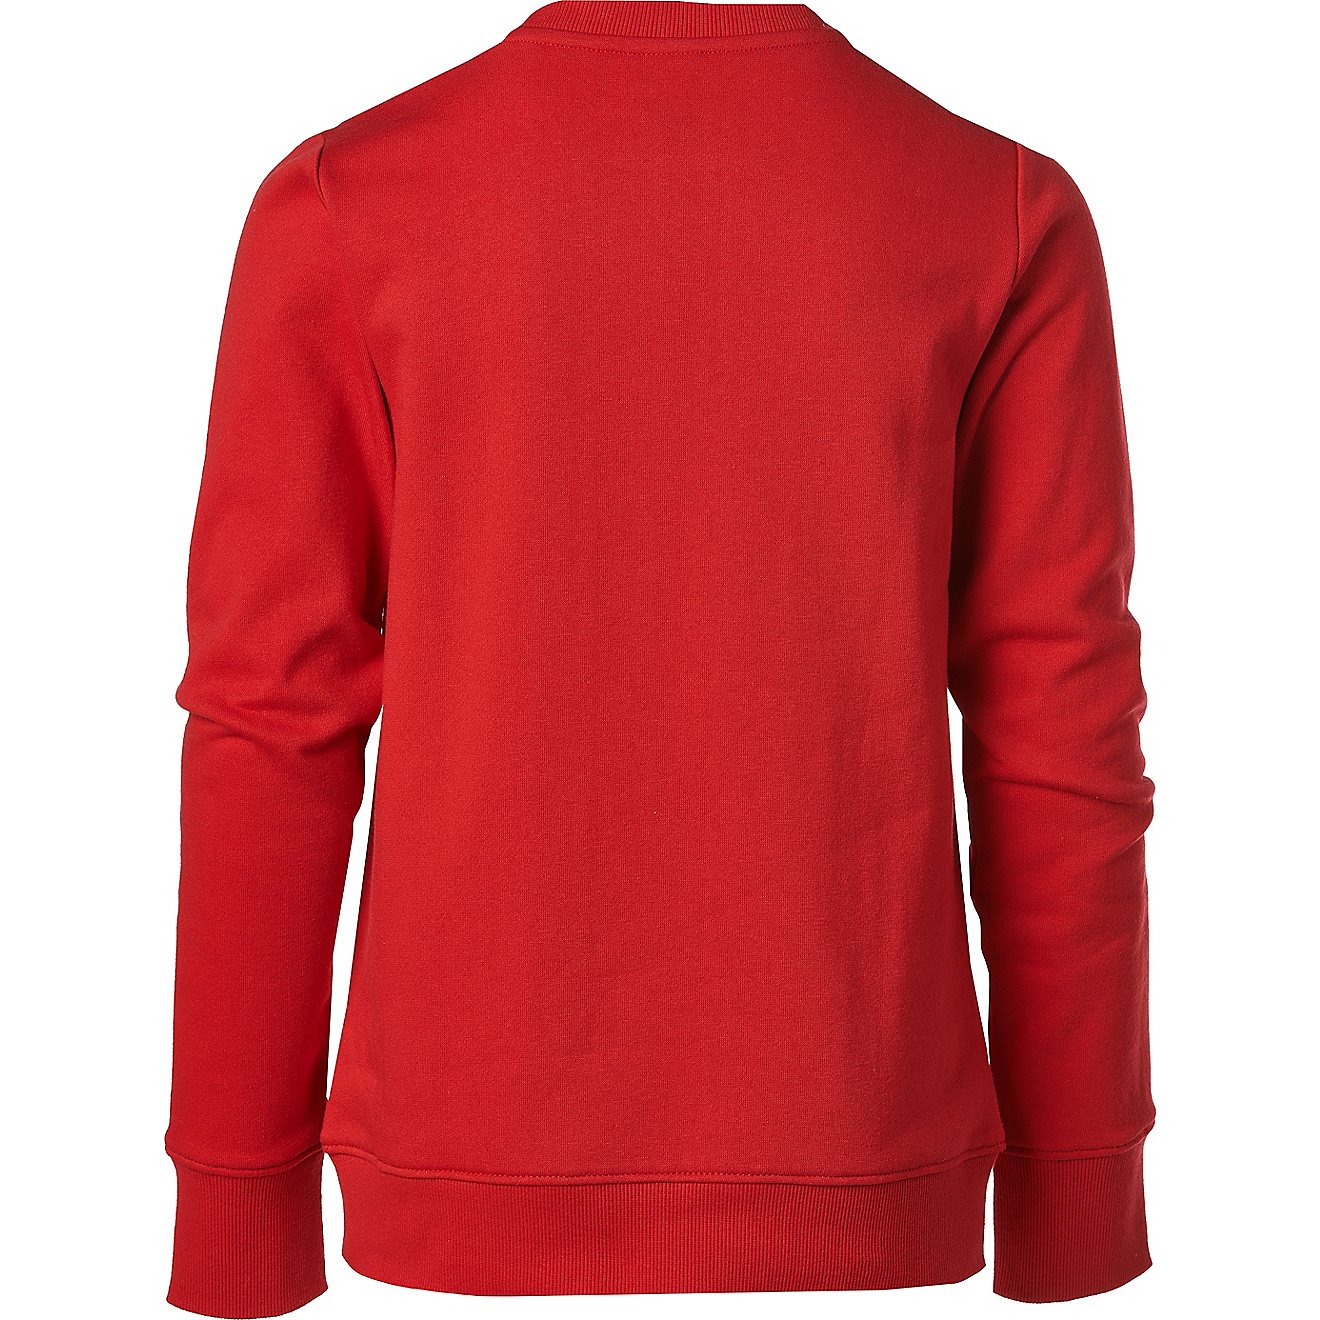 BCG Boys’ Lifestyle Coded to Win Cotton Fleece Sweatshirt                                                                      - view number 2